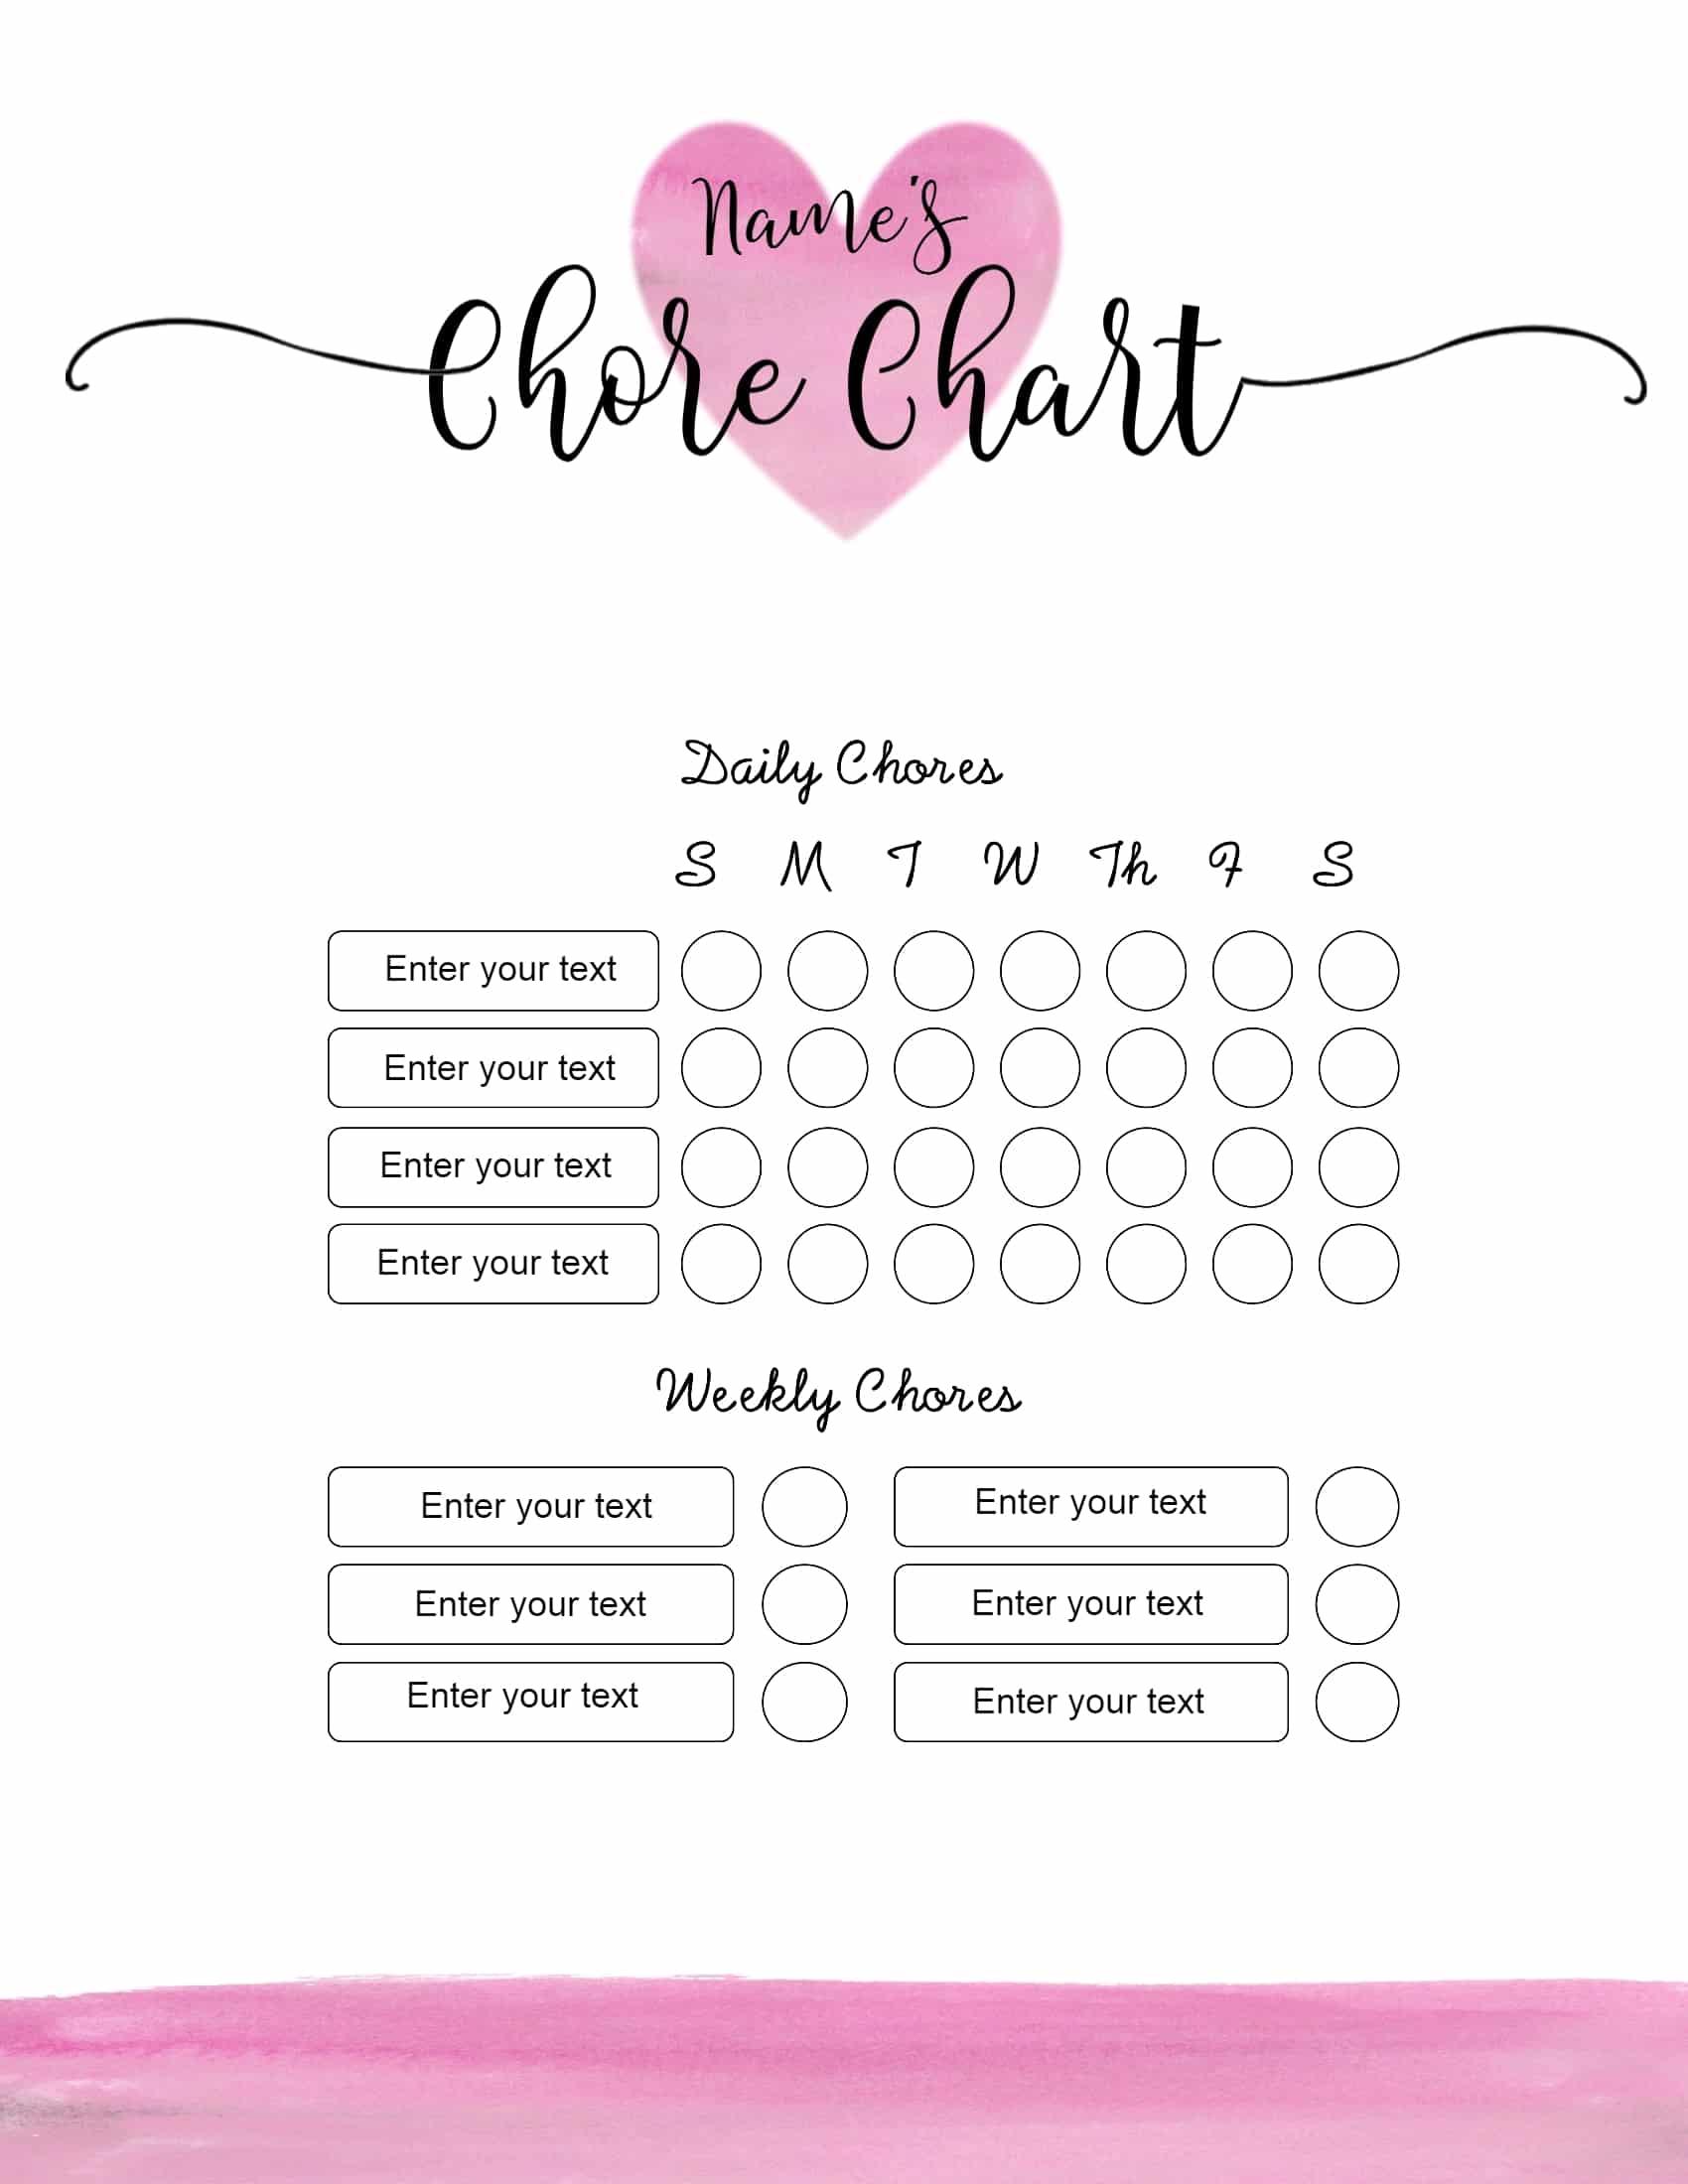 create-your-own-chore-chart-printable